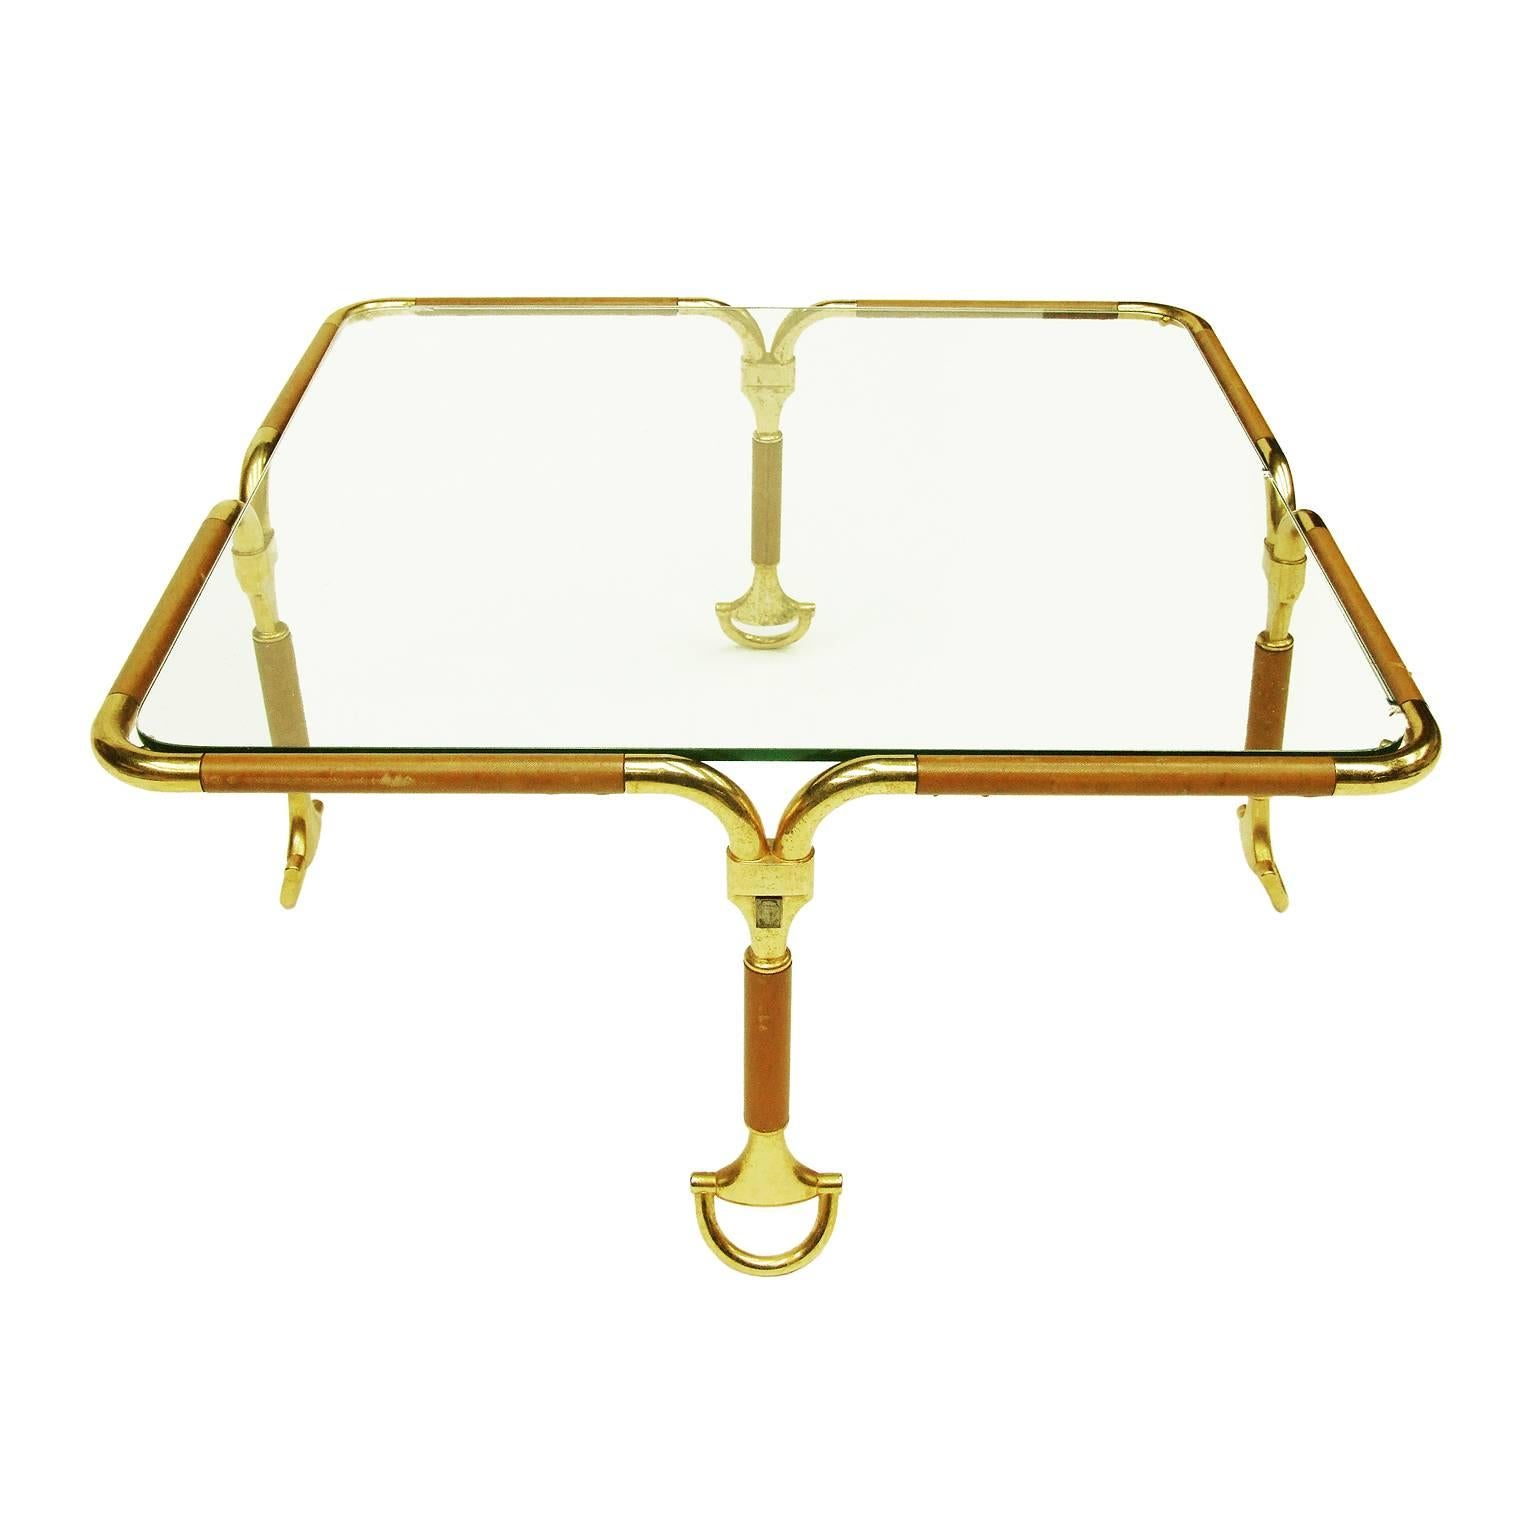 1970s rare occasional table designed by Gucci, Italy.

Gold-plated tubular metal frame with tan leather detail. Four stirrup feet.

Clear glass insert.

